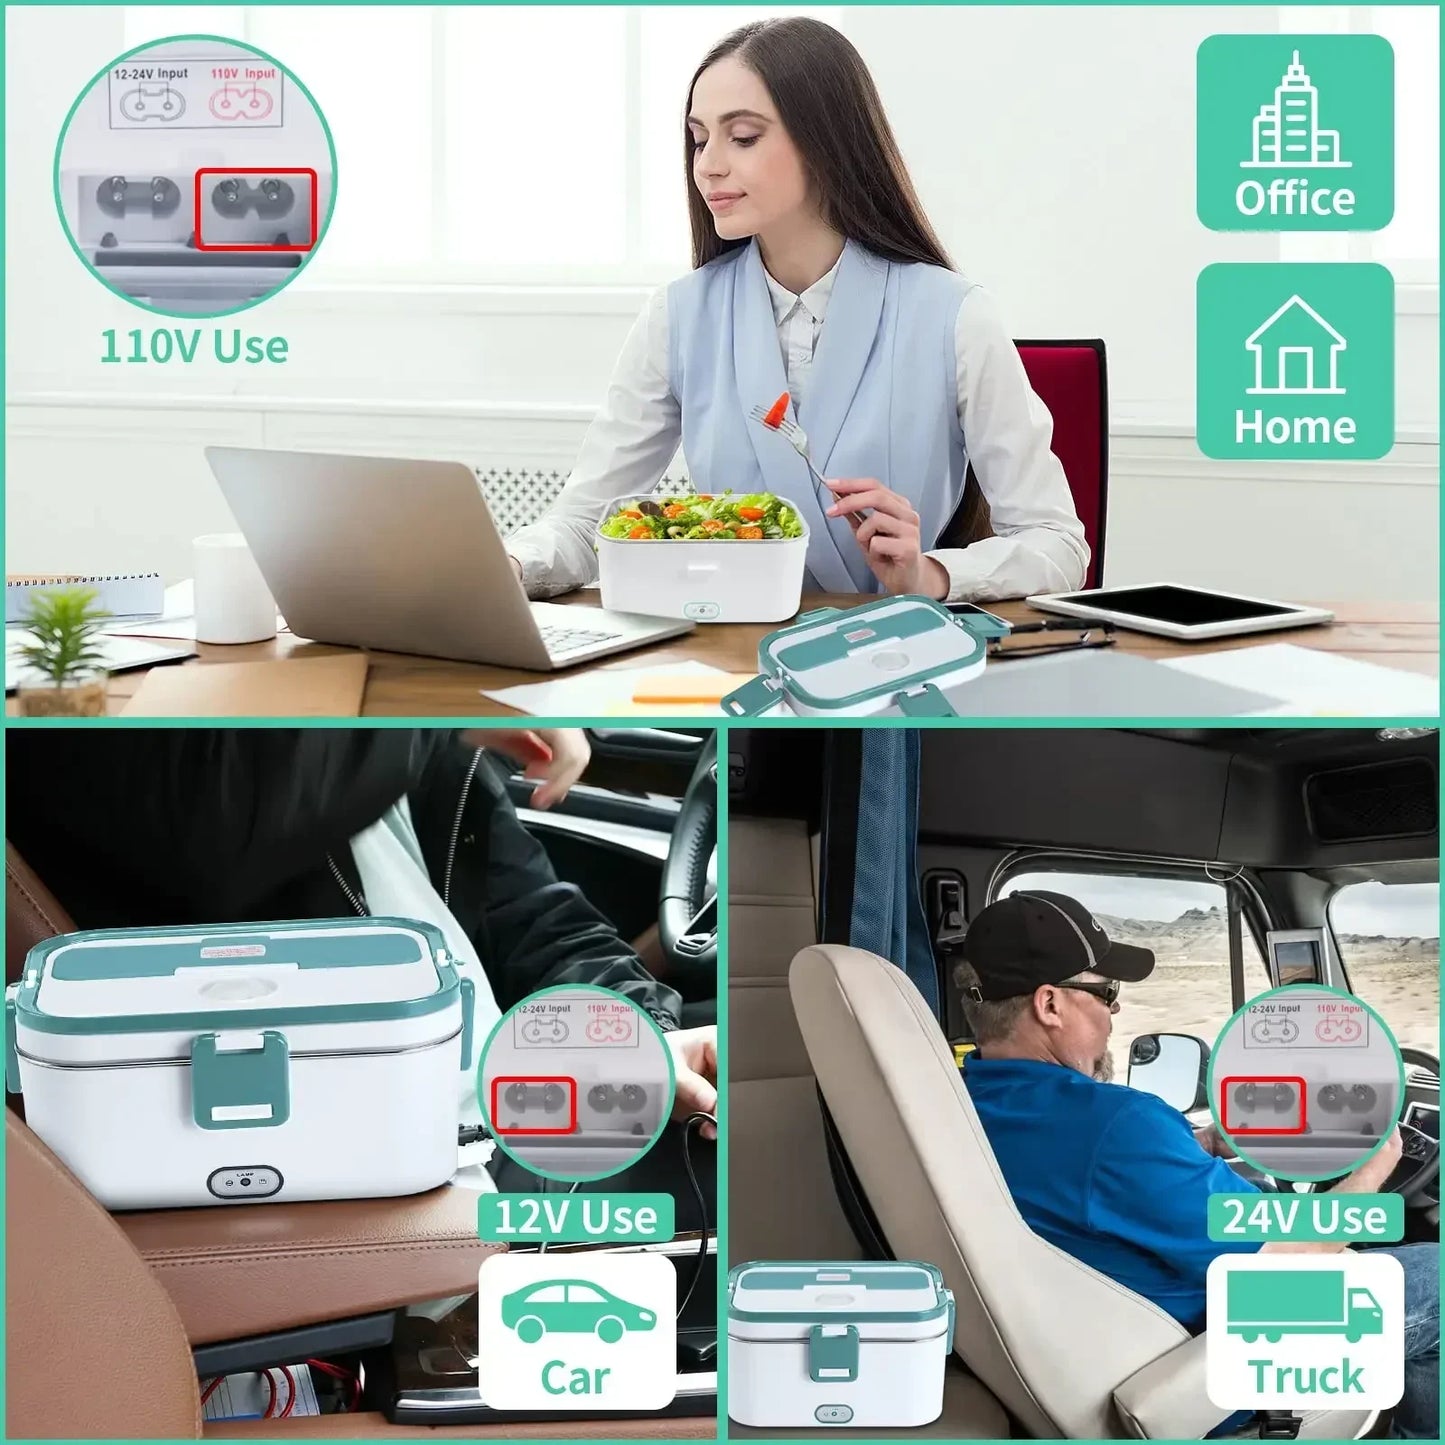 Depot Deluxe ™ Electric Lunch Box